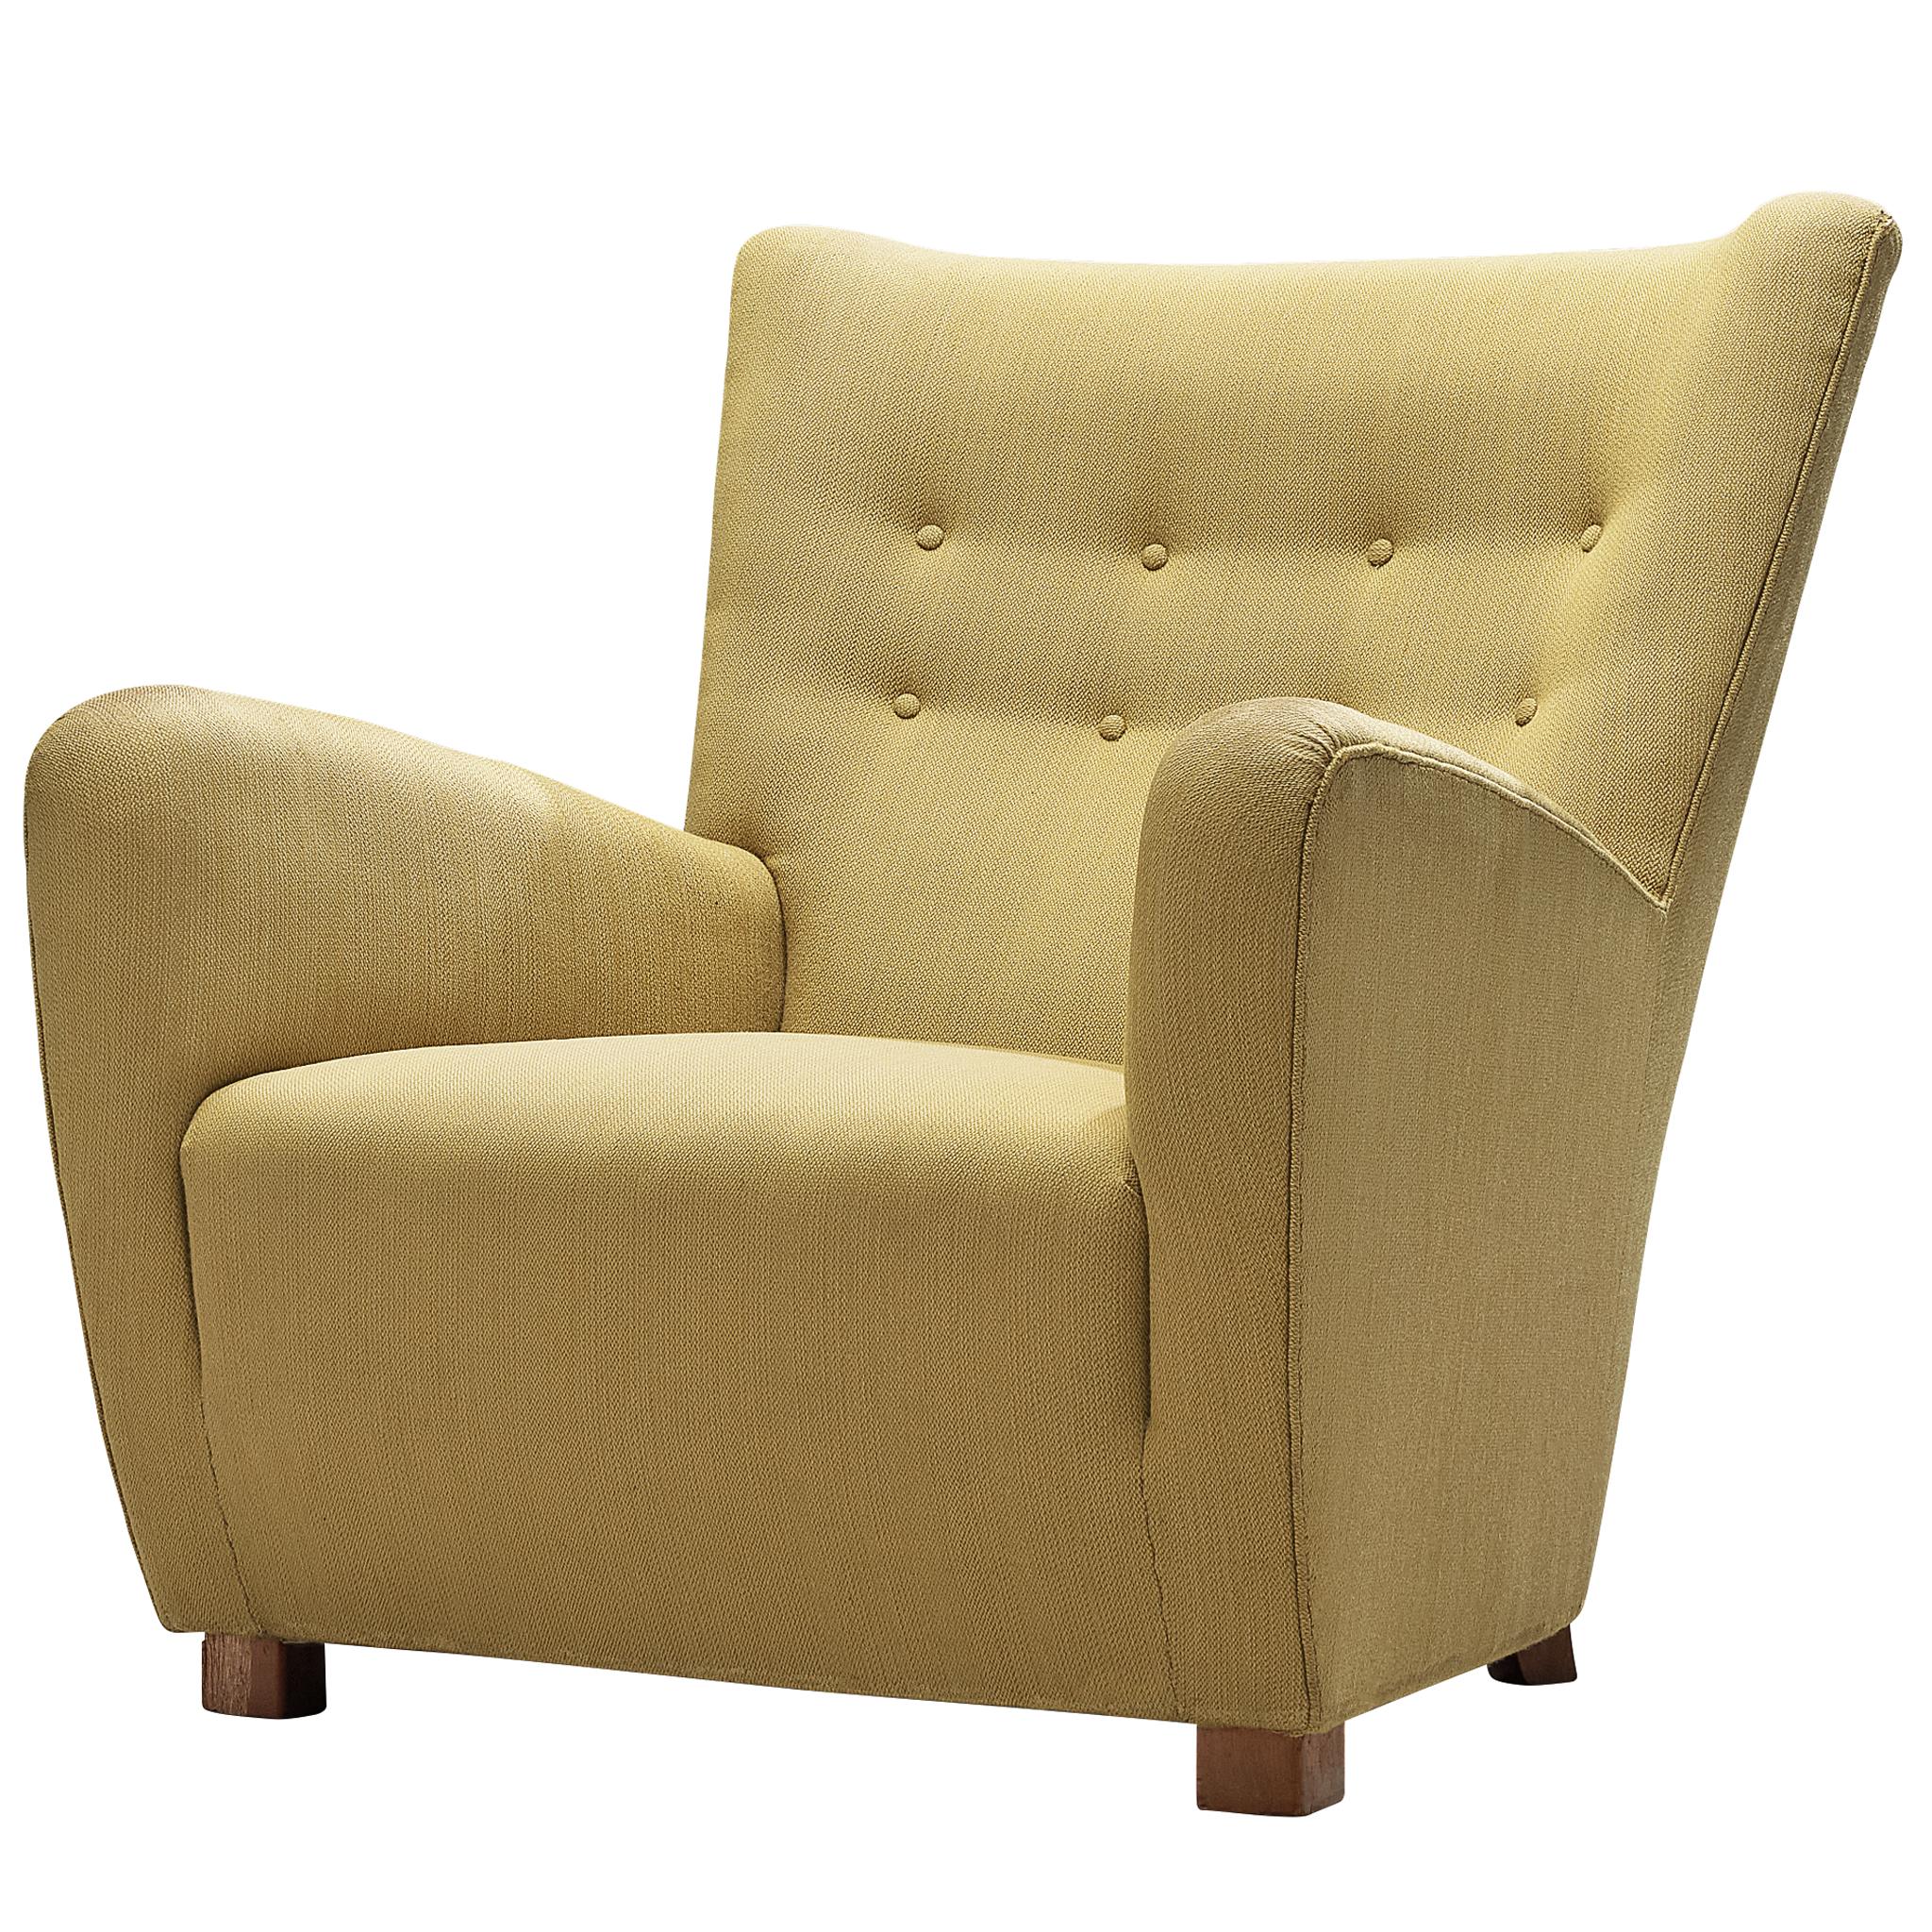 Comfortable Danish Lounge Chair in Fabric Upholstery